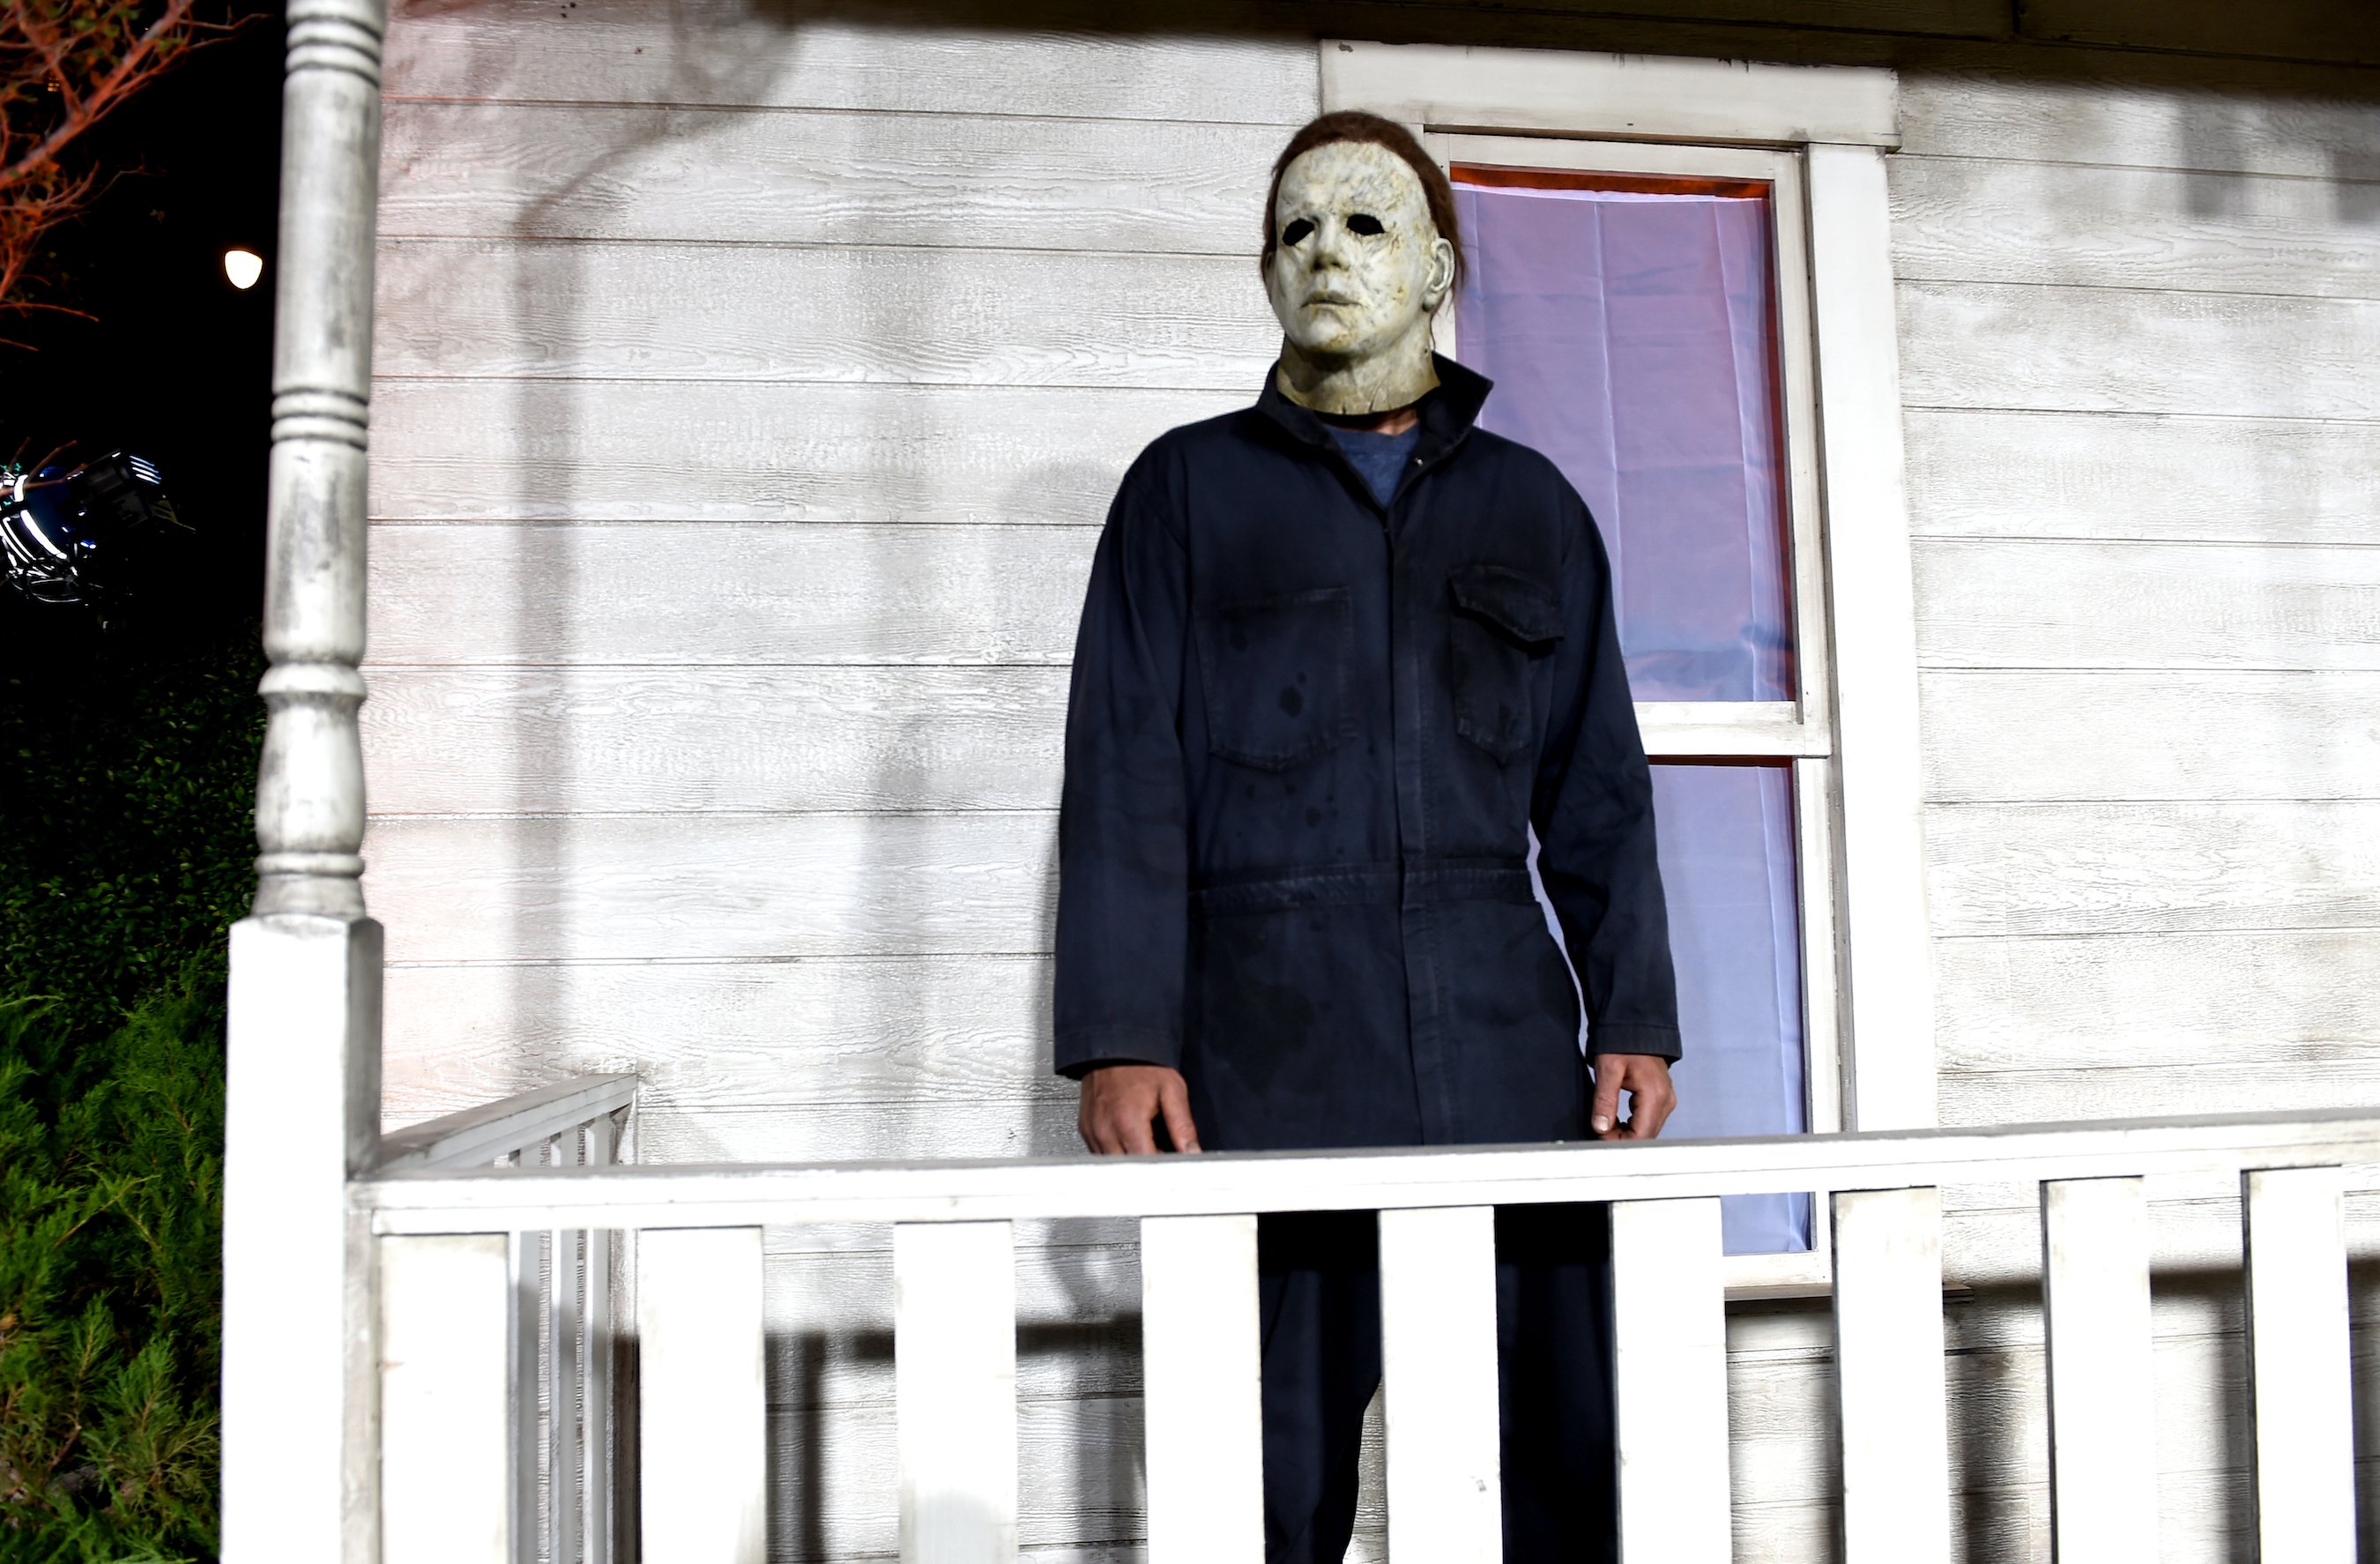 Michael Myers scares guests at Universal premiere of Halloween